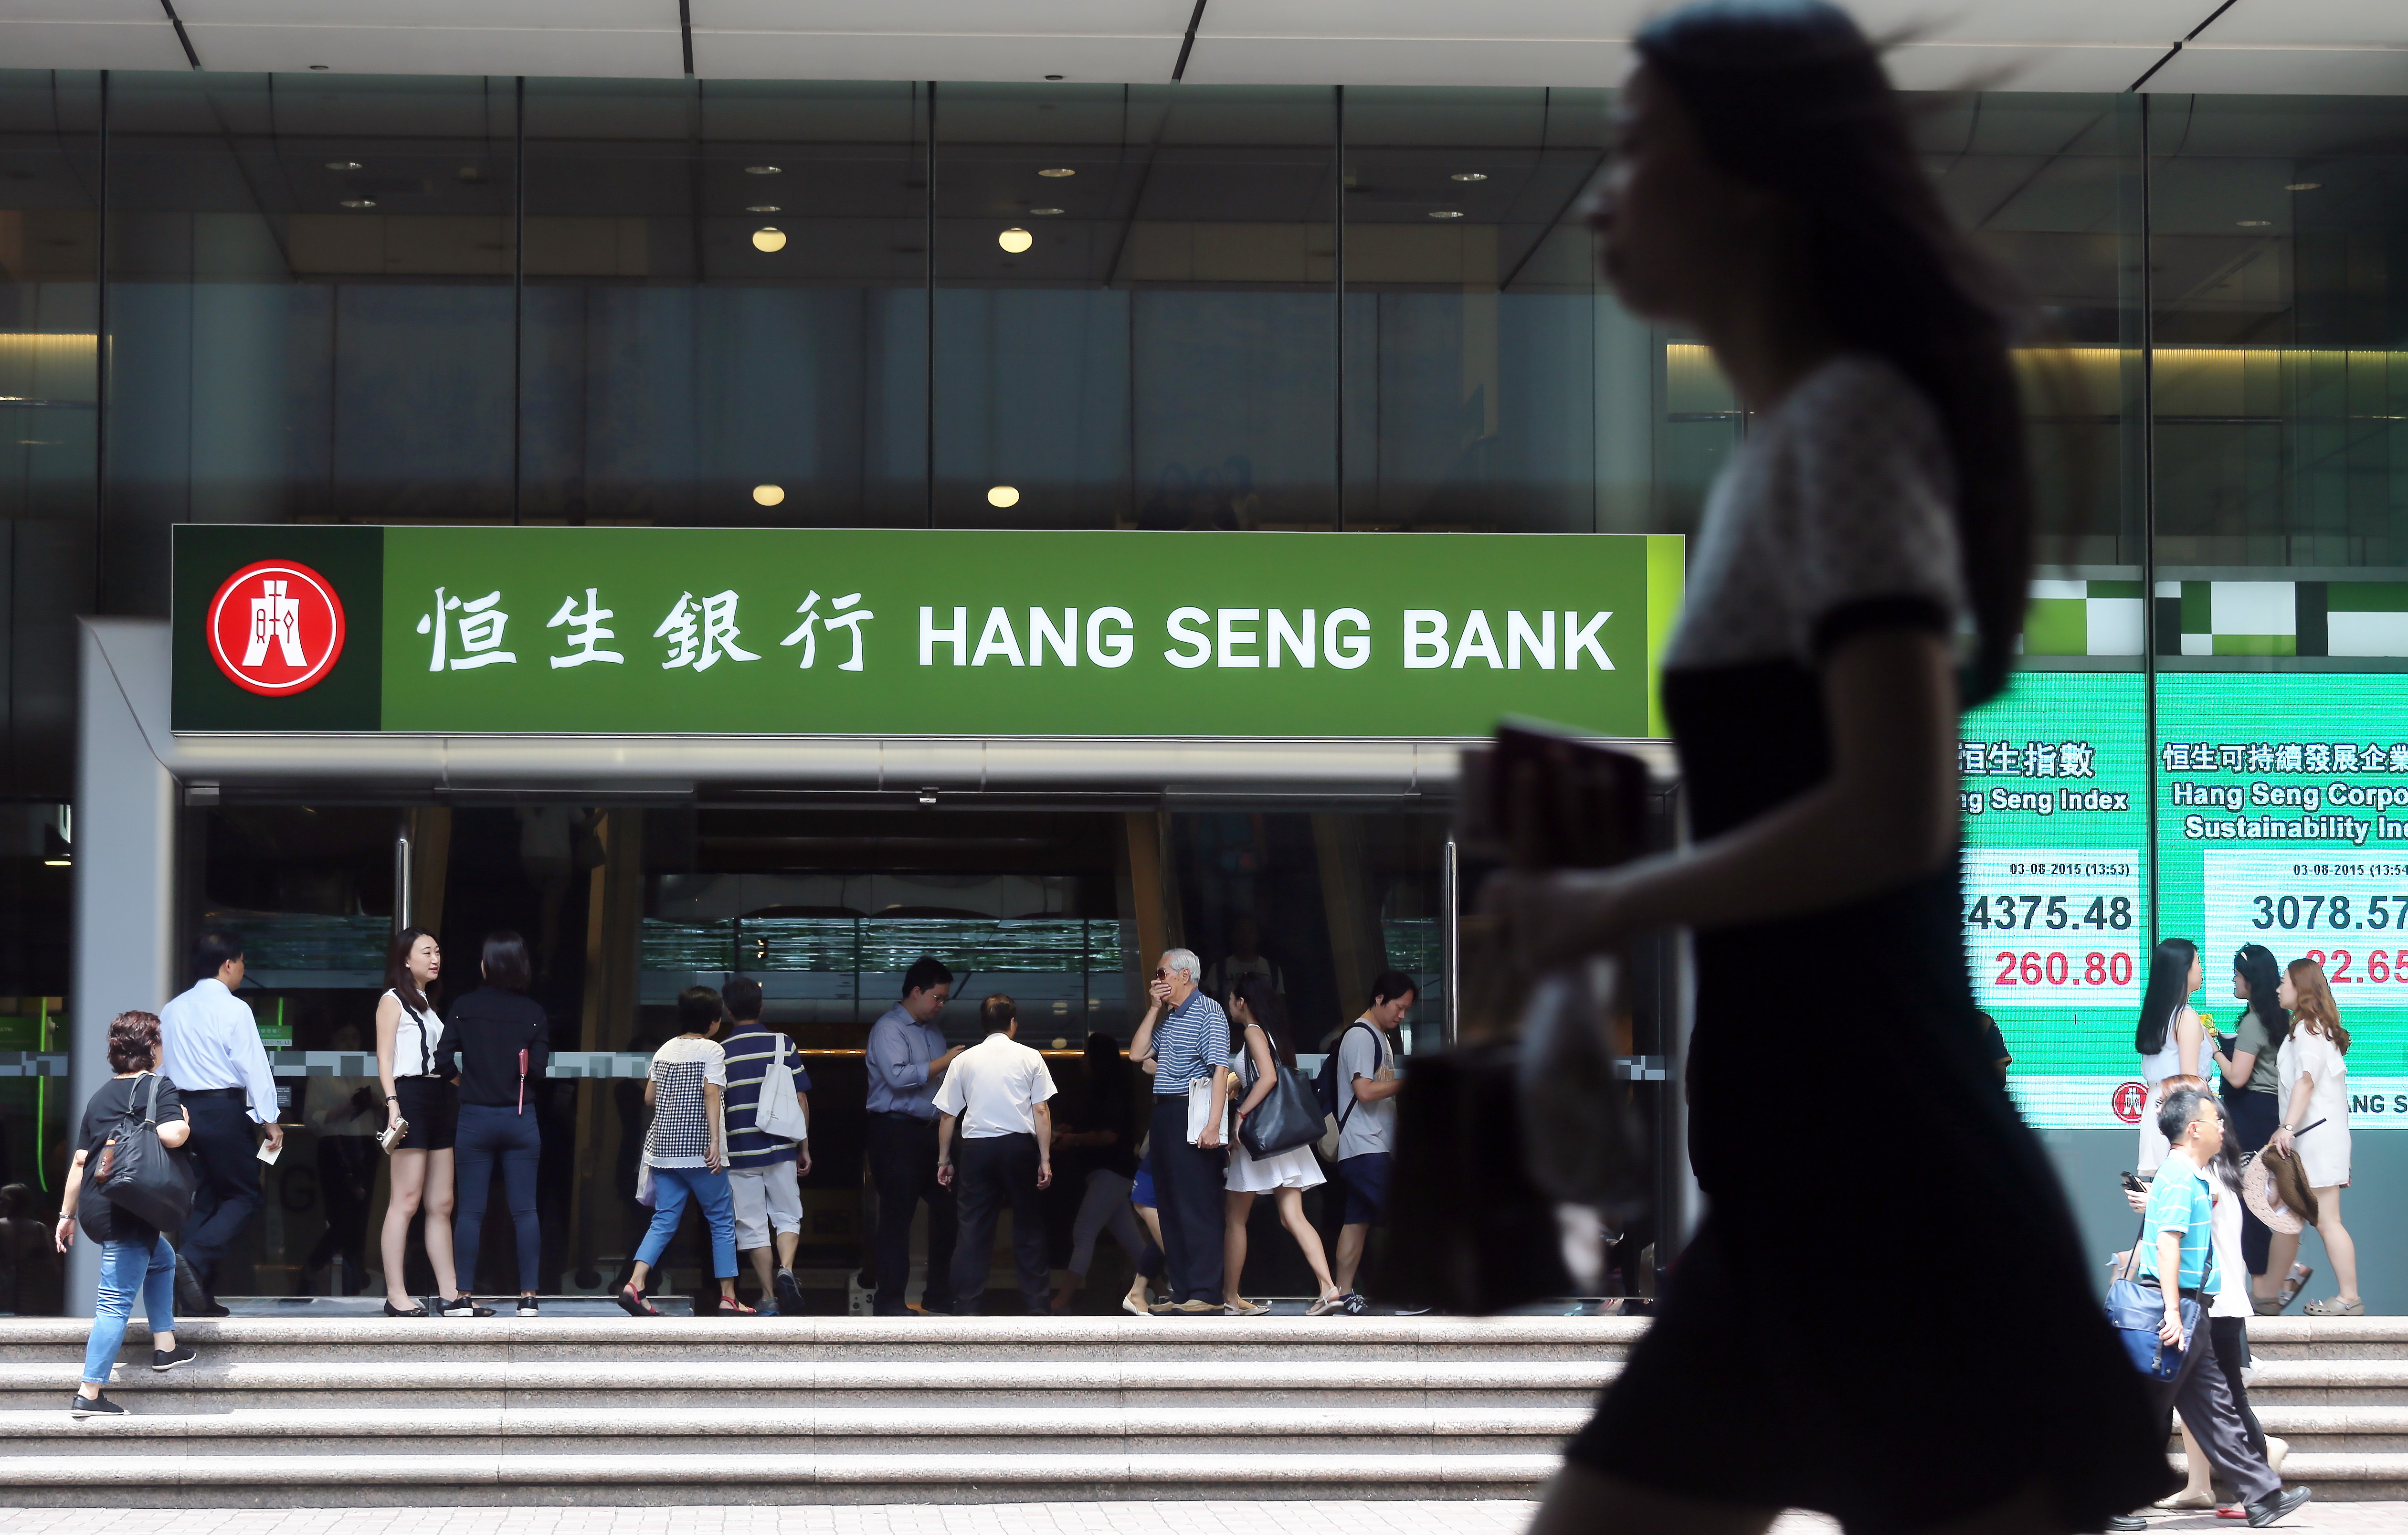 Hang Seng Bank Head Office located at Des Voeux Road in Central.